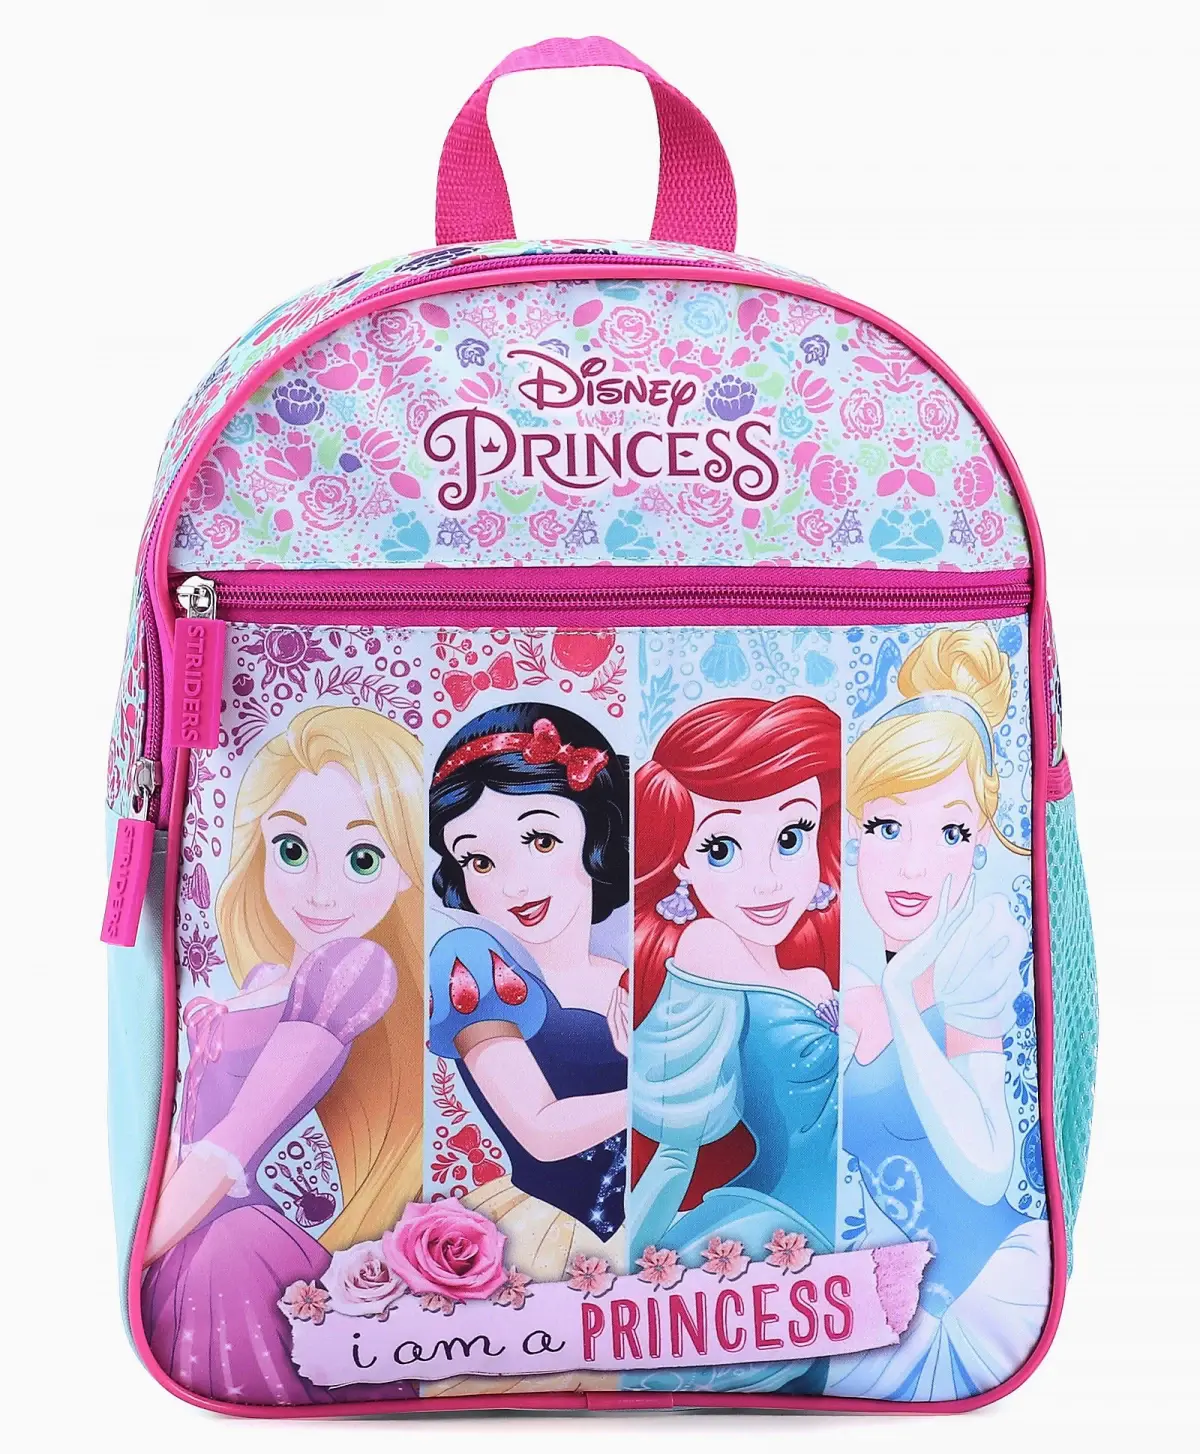 Striders 13 inches Princess School Bag Royal Elegance in Every Step for Little Royalty Multicolor For Kids Ages 2Y+